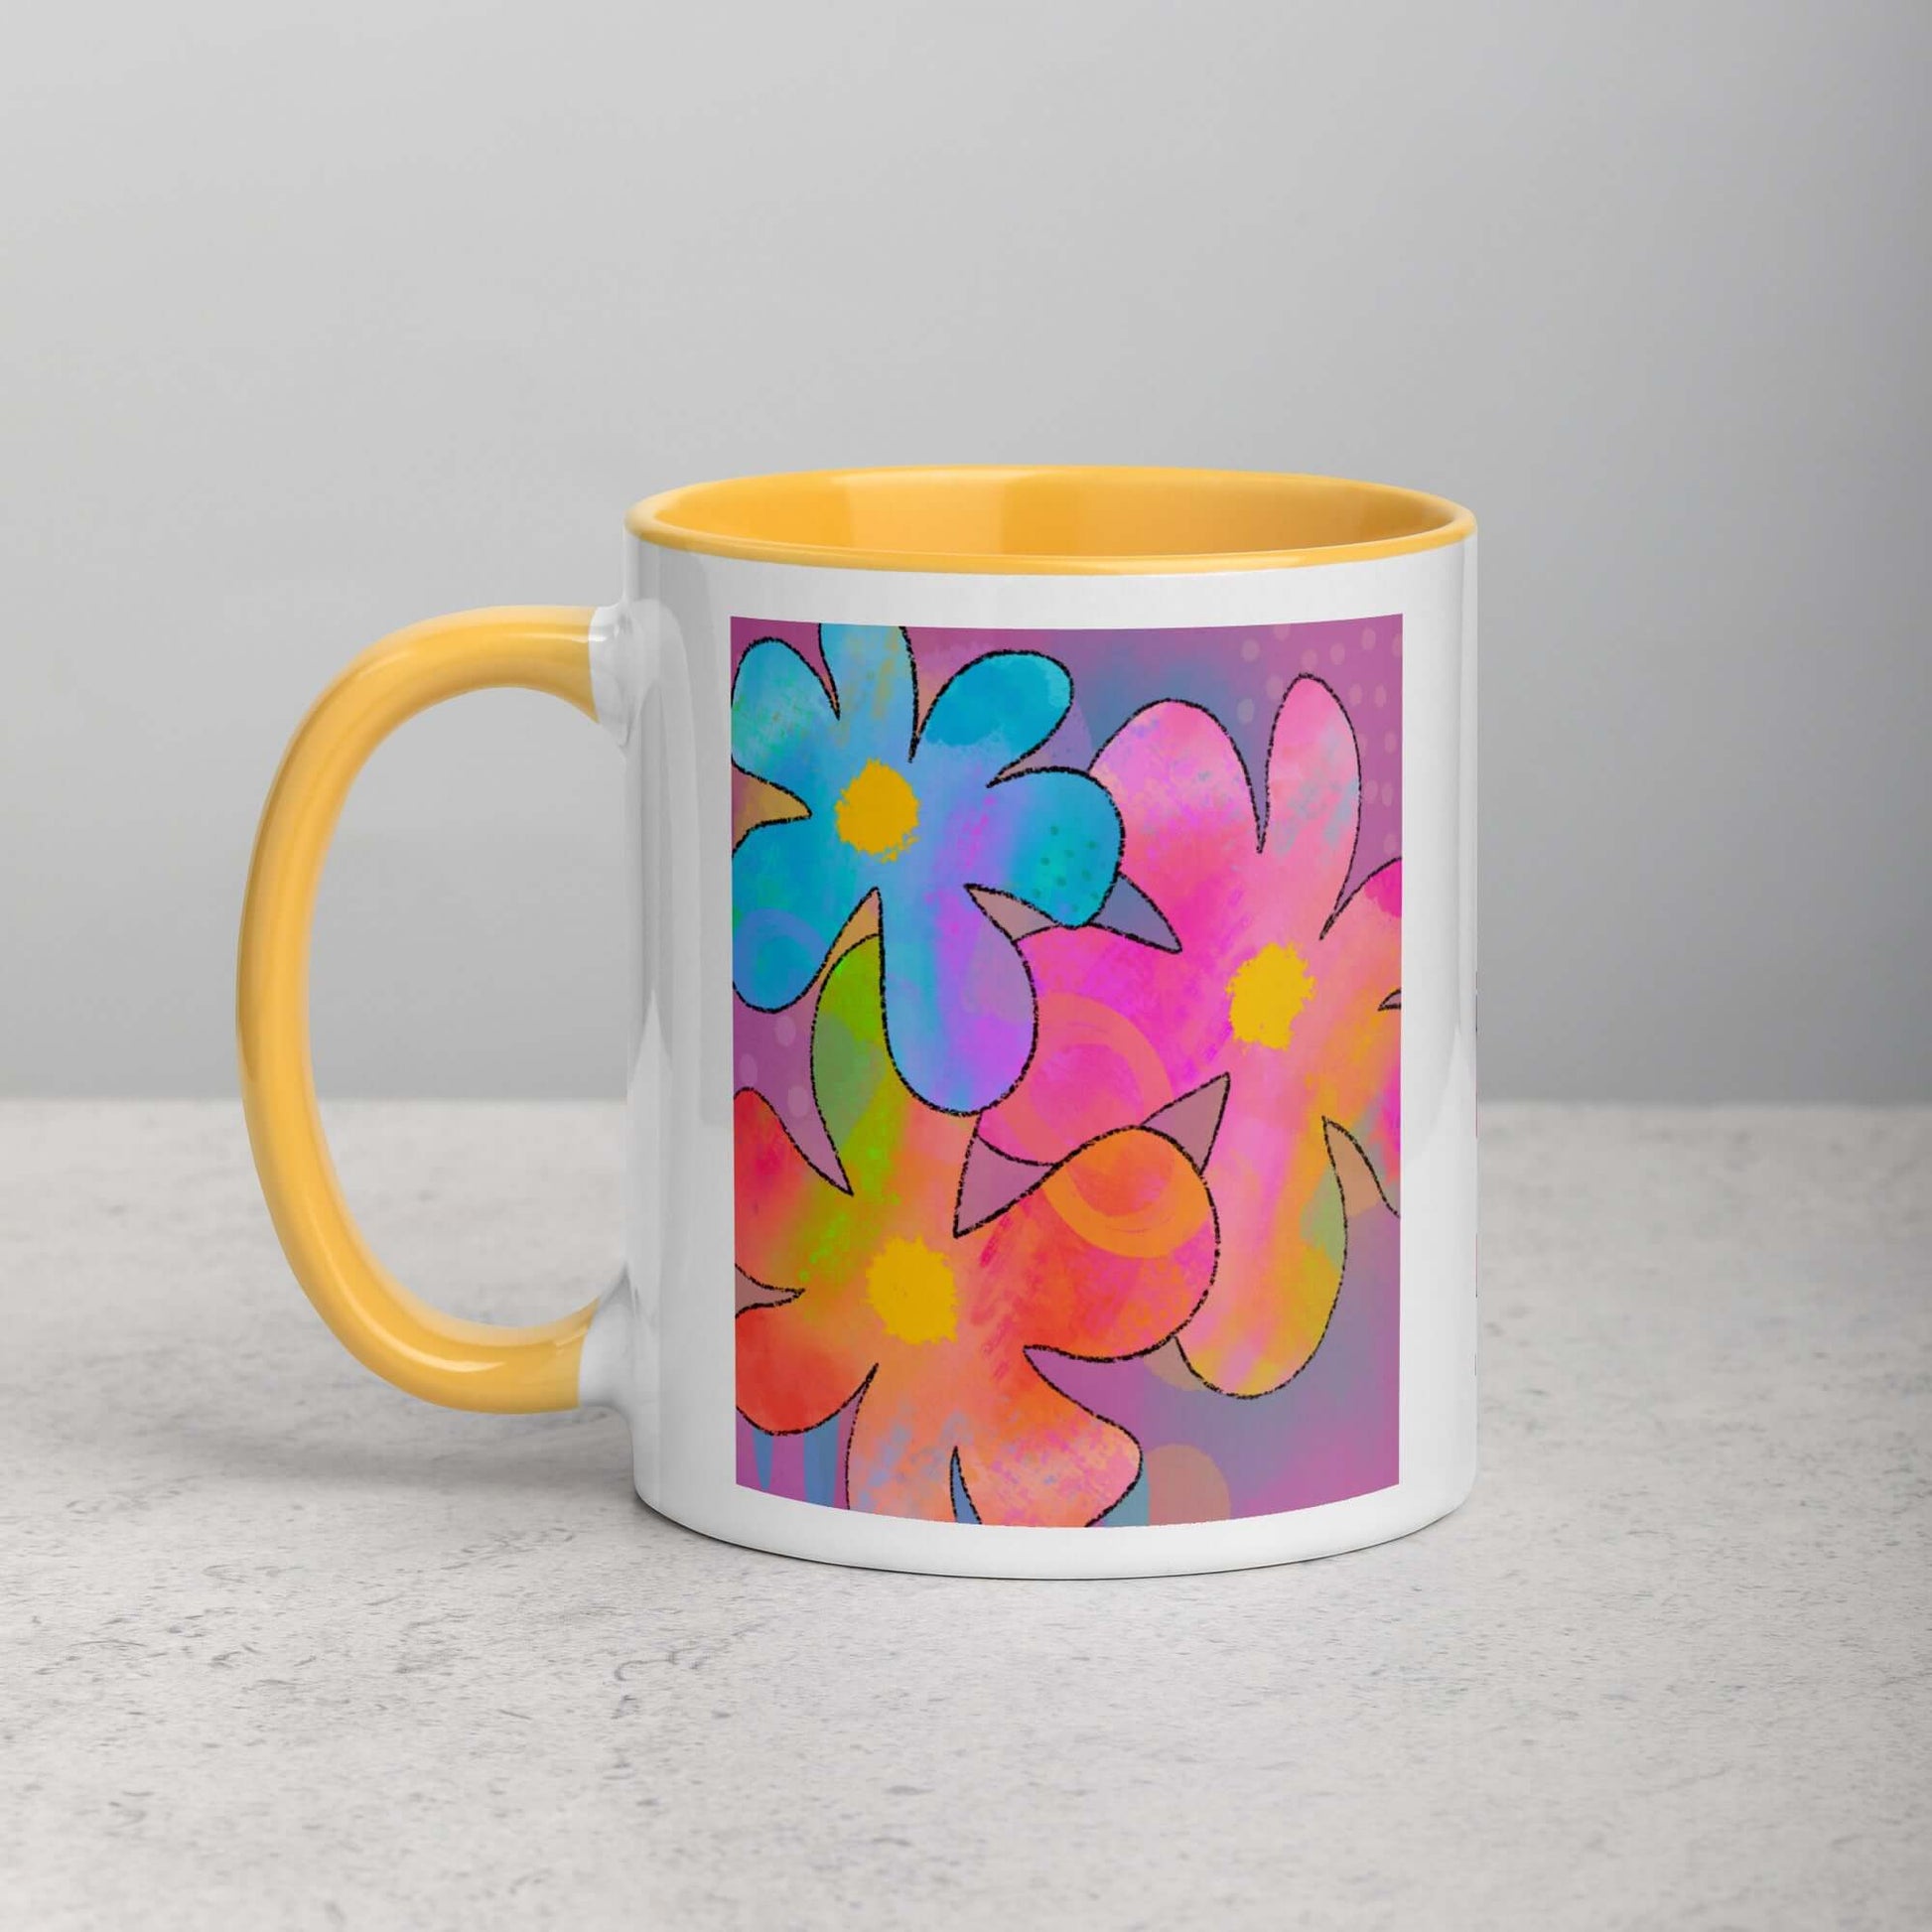 Big Colorful 1960s Psychedelic “Hippie Flowers” Mug with Golden Yellow Color Inside Left Handed Front View